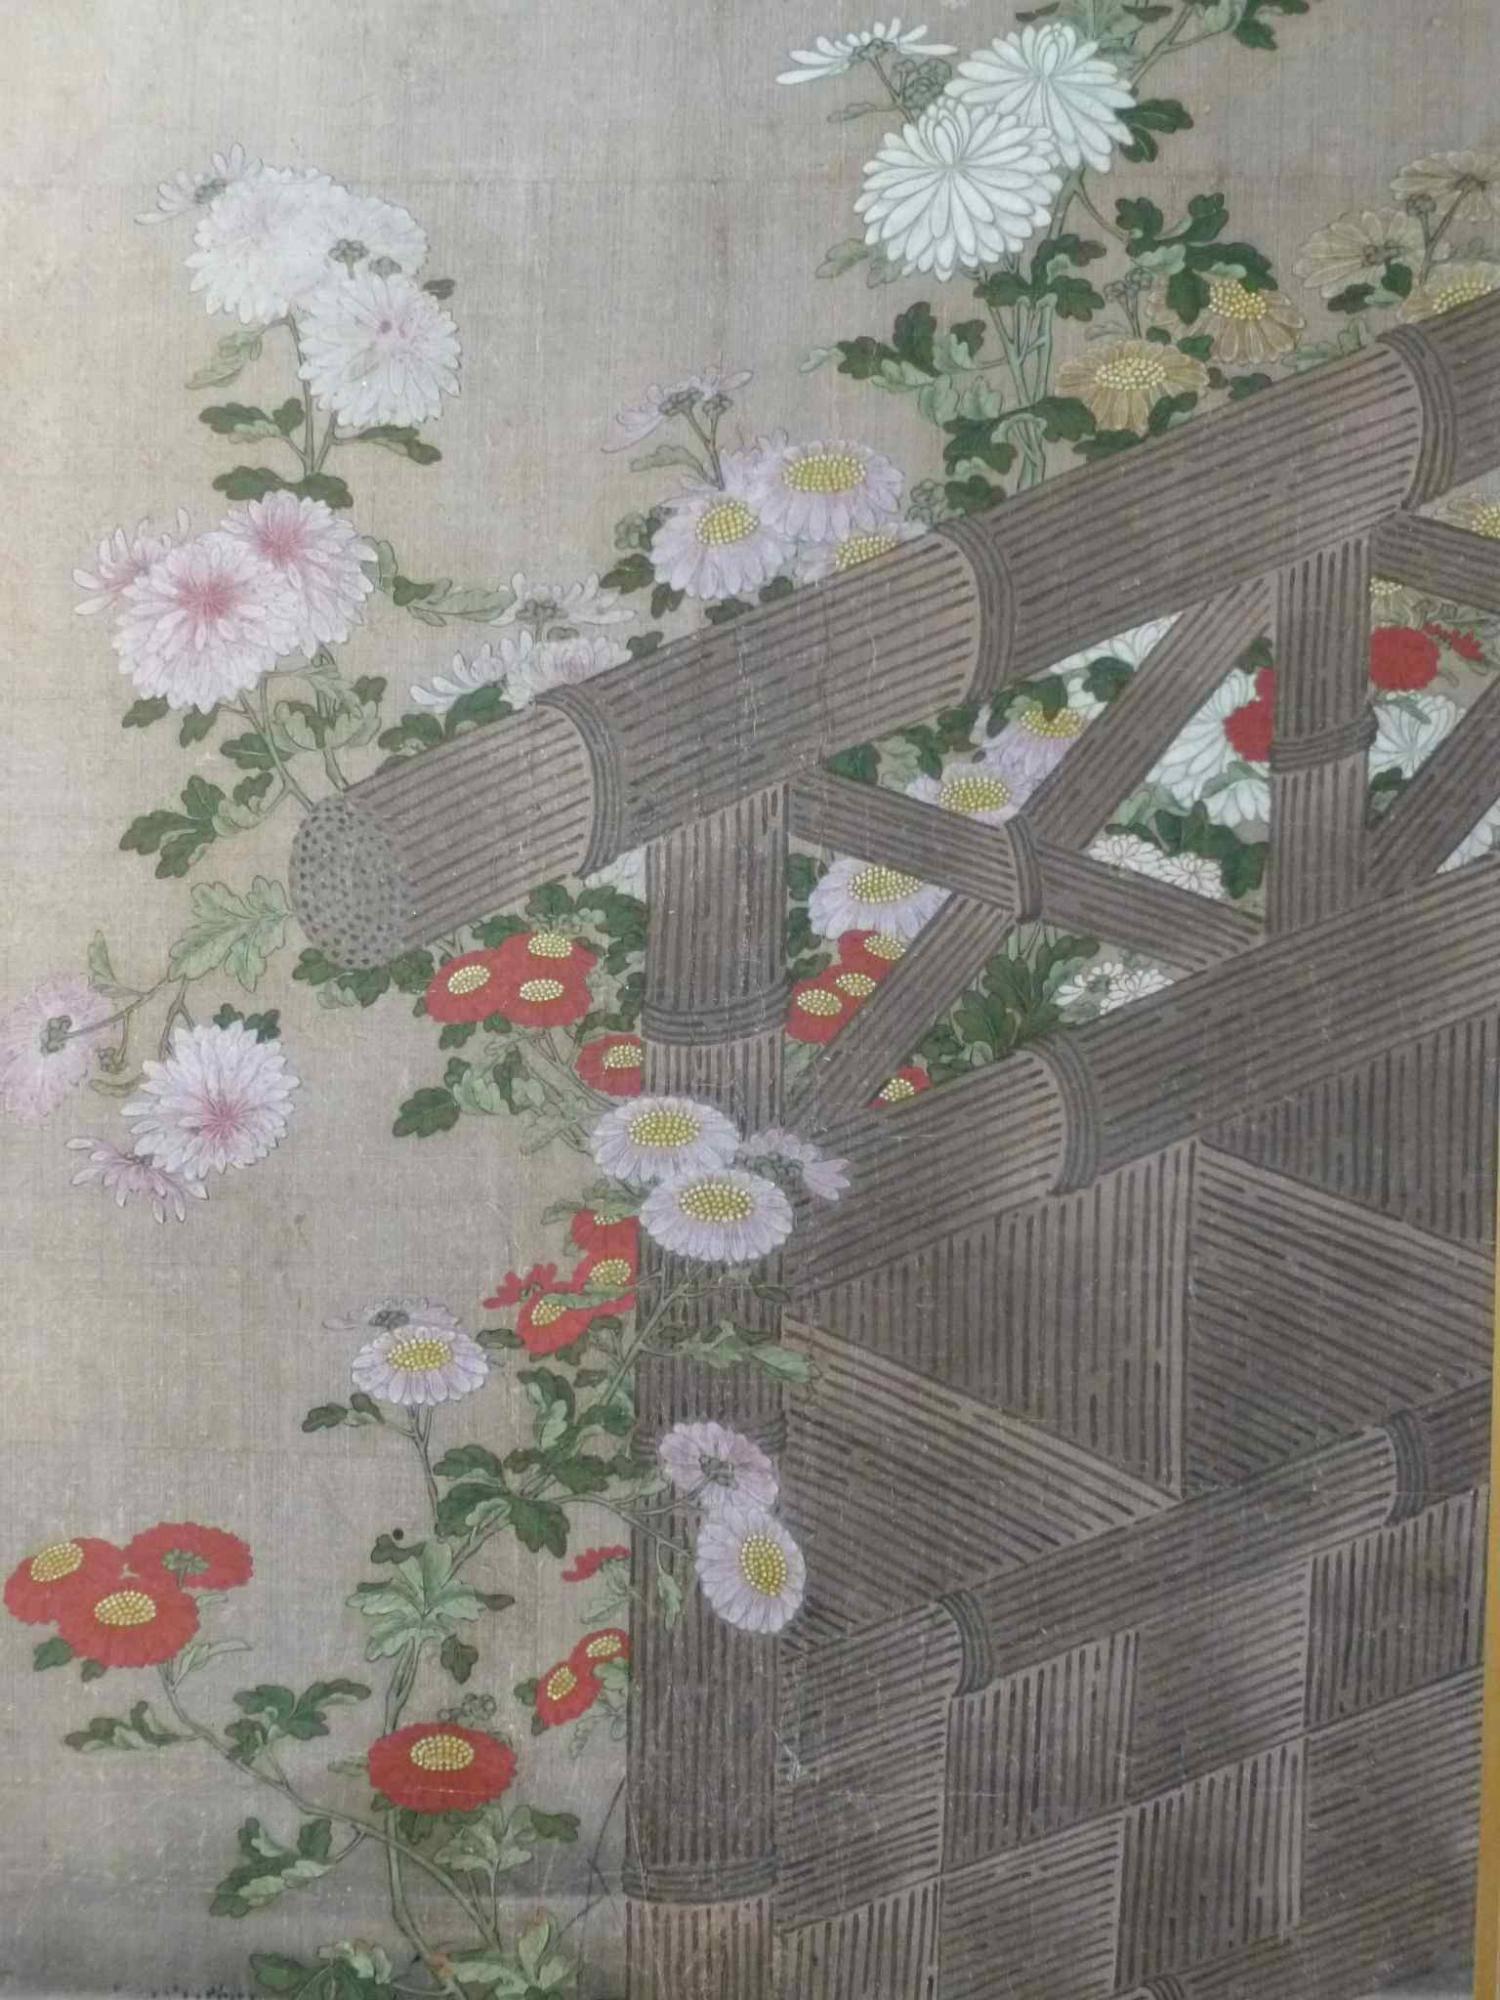 This singular screen panel is a painting of flowers and a fence.
Origin: Japan
Age: 19th century
Size: 35